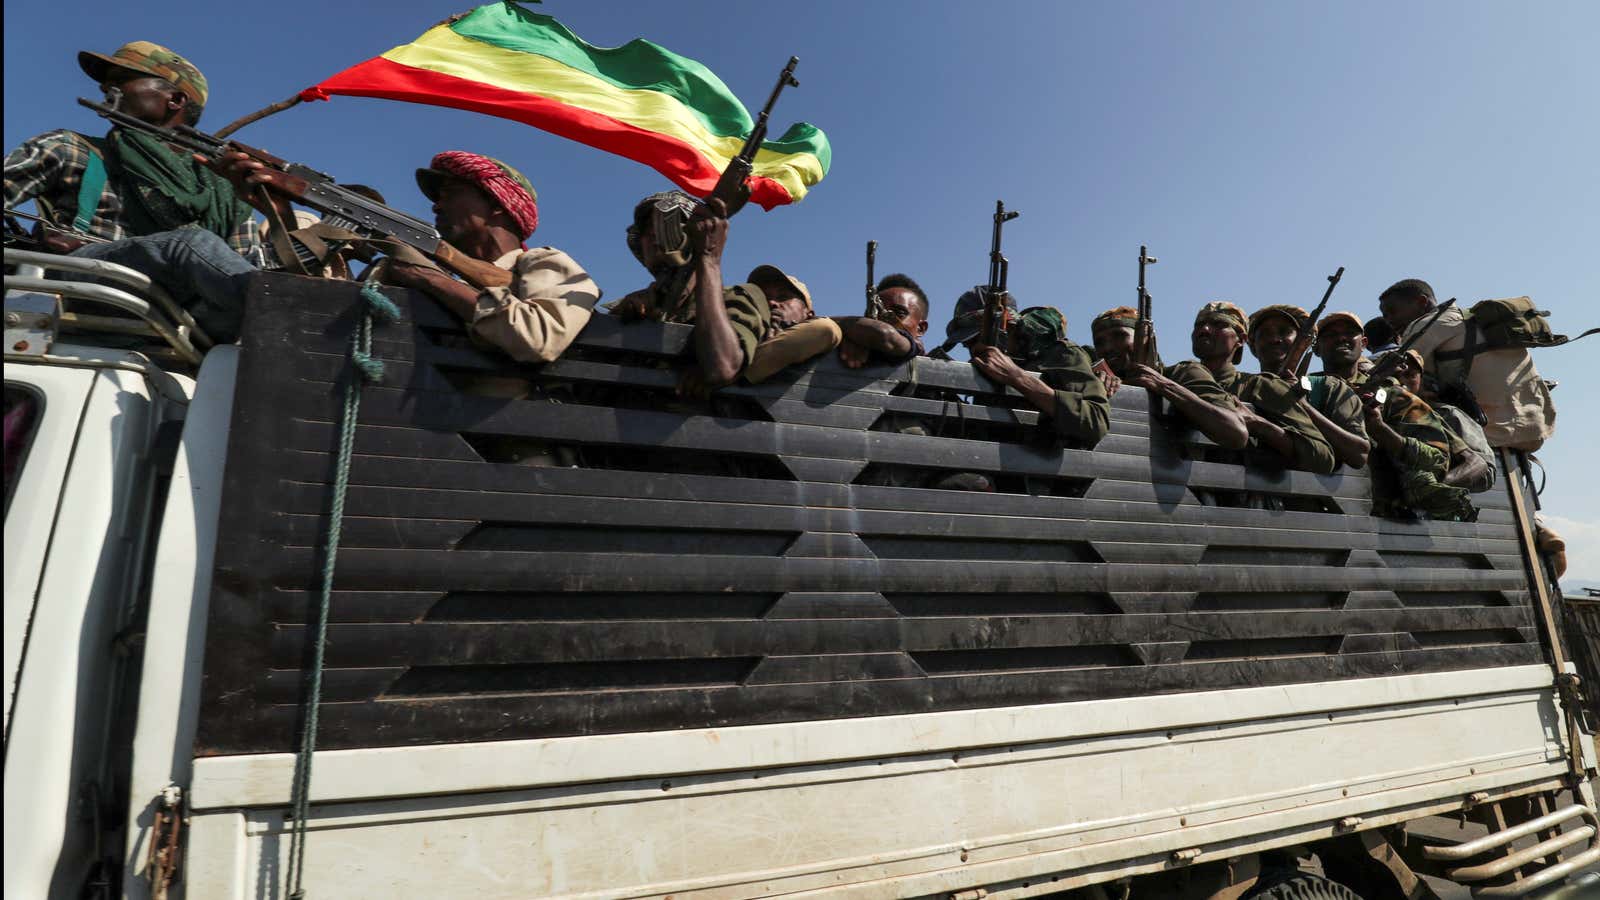 Amhara region militias ride on their truck as they head to face the Tigray People’s Liberation Front (TPLF), in Sanja, Amhara region near a border with Tigray, Ethiopia Nov. 9, 2020.